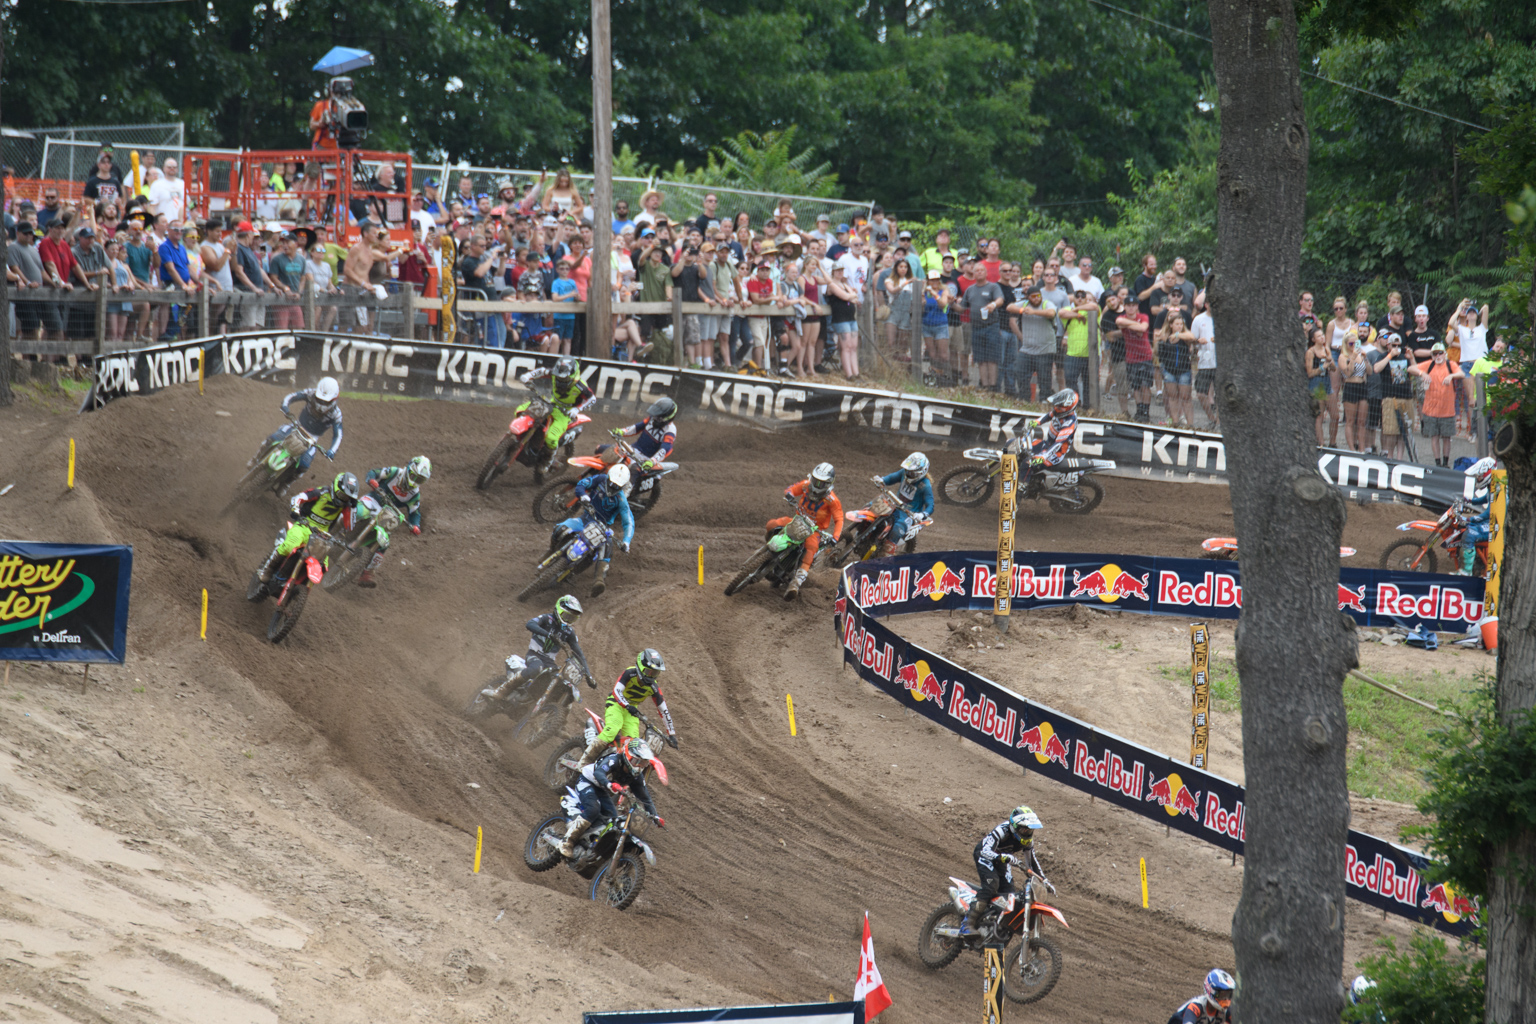 Thousands will ride to Southwick this weekend to watch top motocross talent 